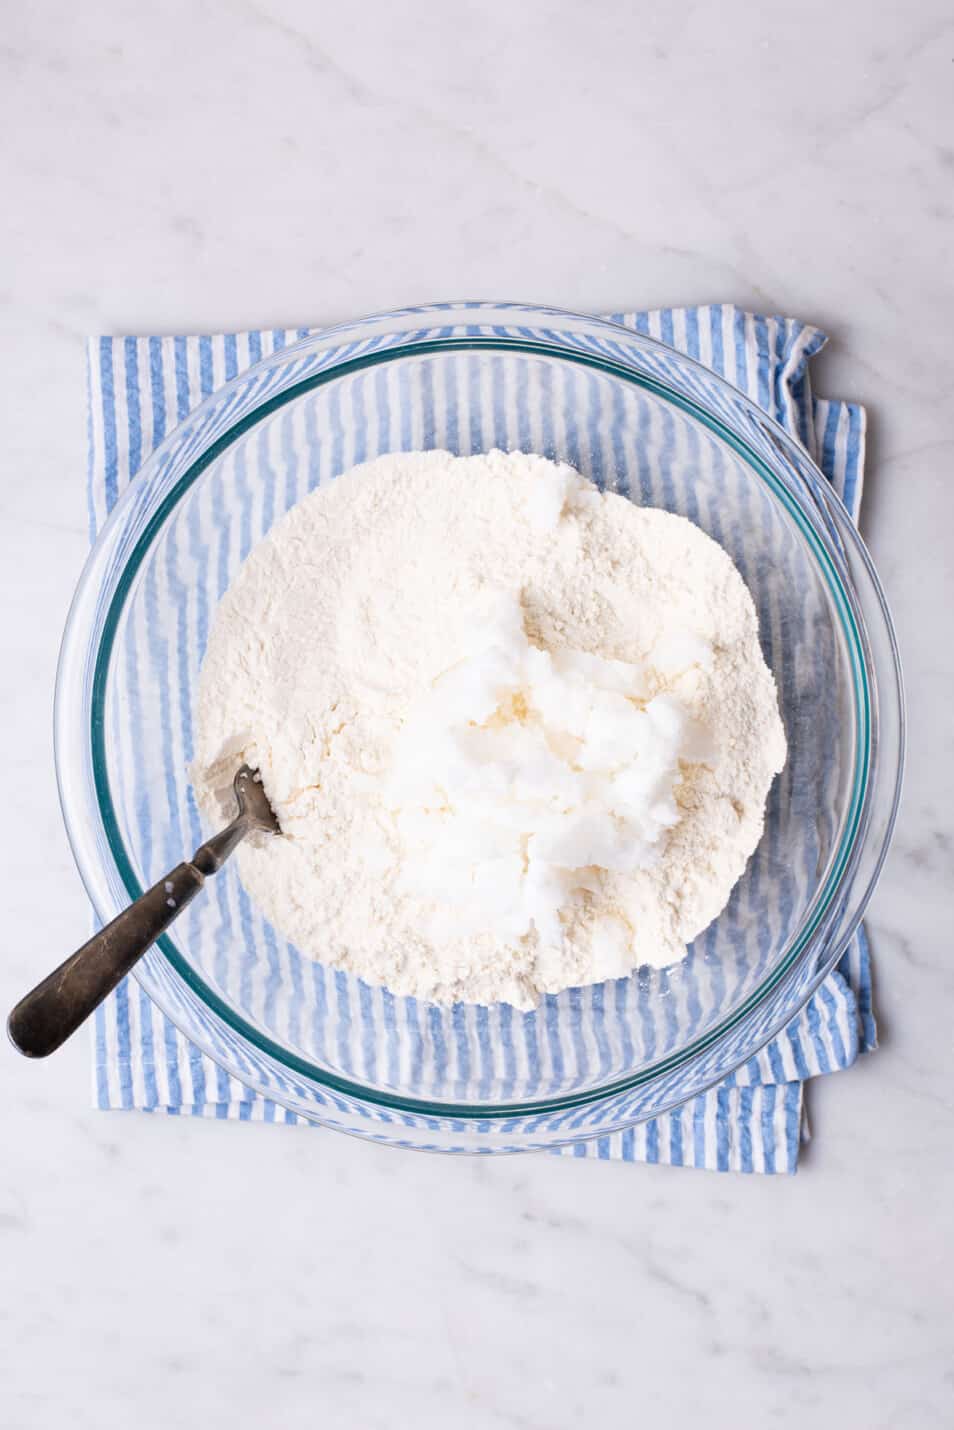 Flour and coconut oil in a glass bowl with a fork.